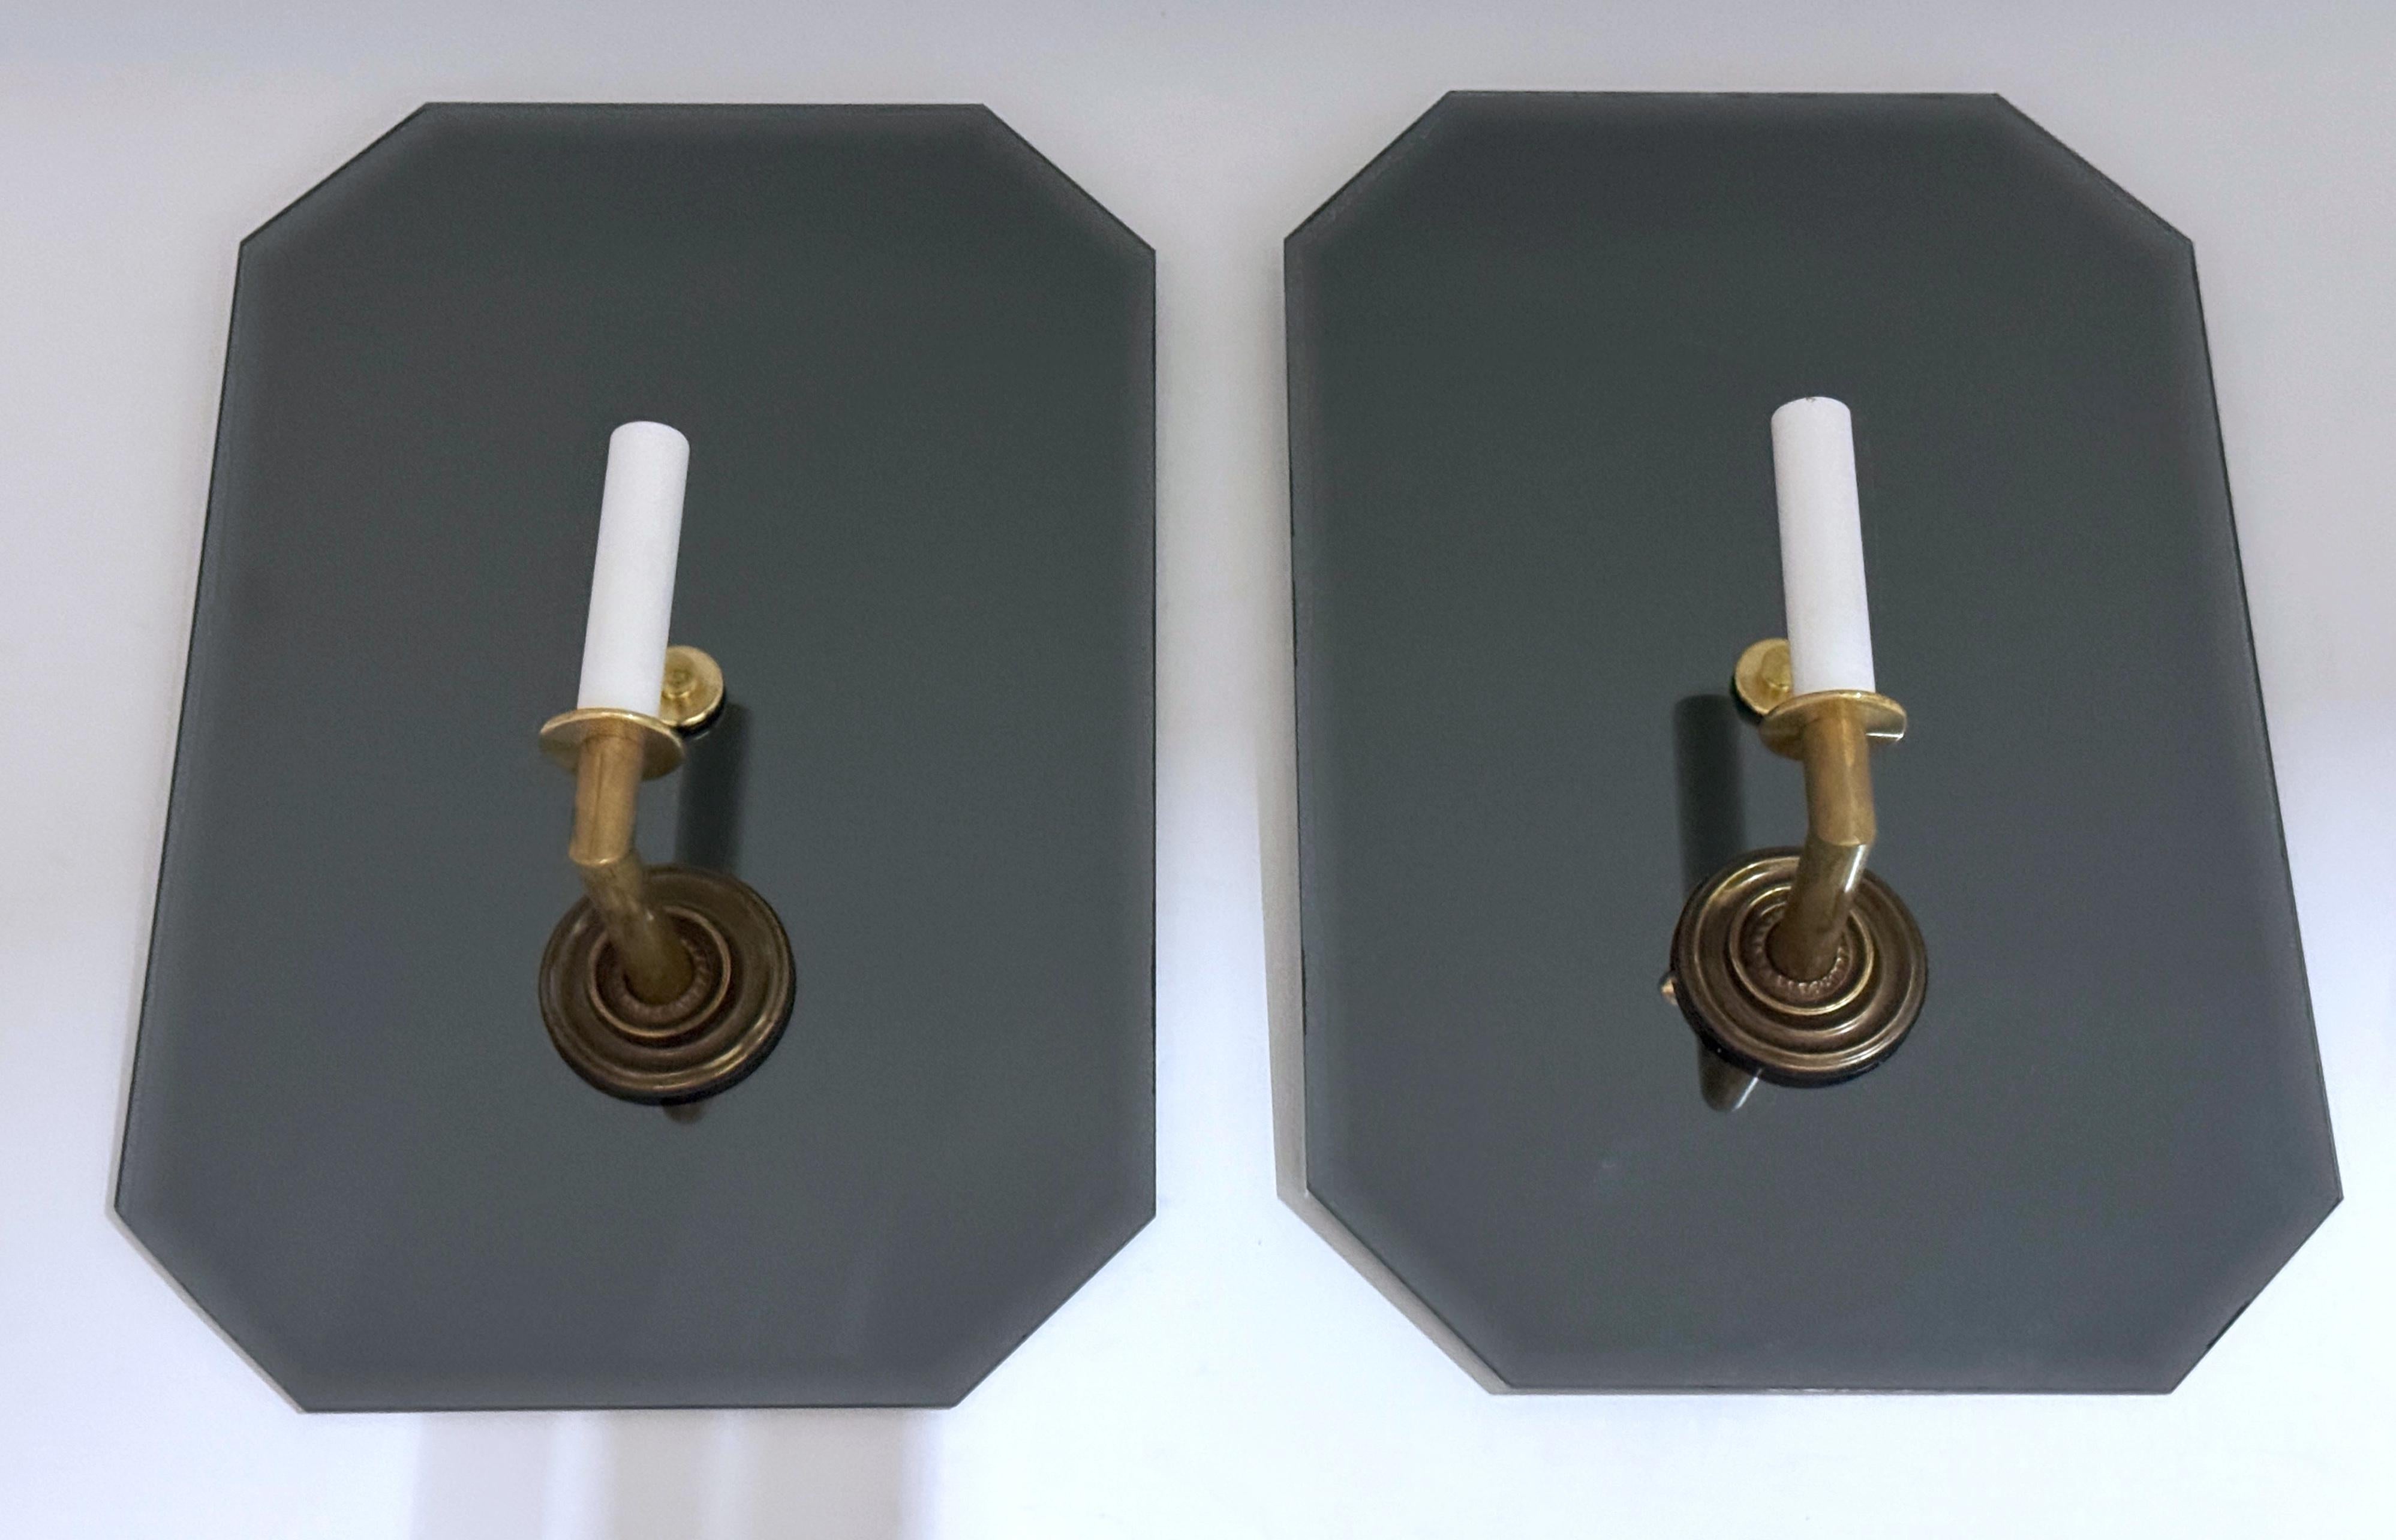 8 French Modern Maison Janson Atrib. Mirror and Bronze Wall Sconces, Sold in Pairs 
Four pairs are currently available.
France, circa 1960s

The timeless elegance of French modern design is reflected in these exquisite Maison Janson-attributed wall